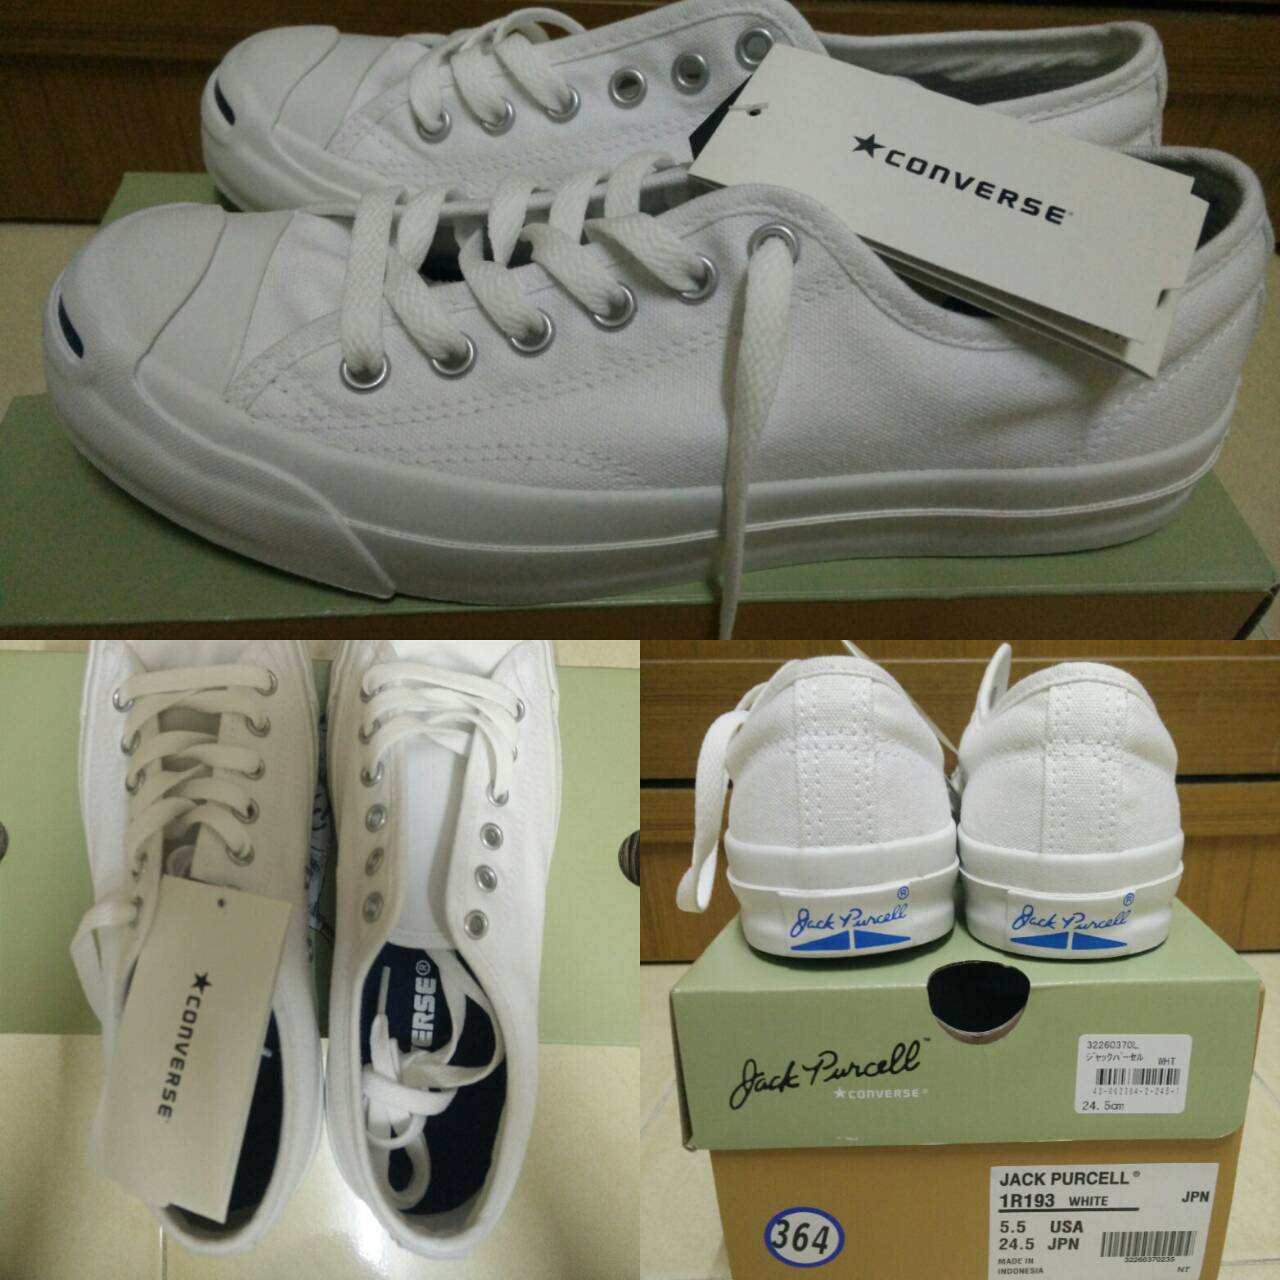 converse jack purcell classic japan edition